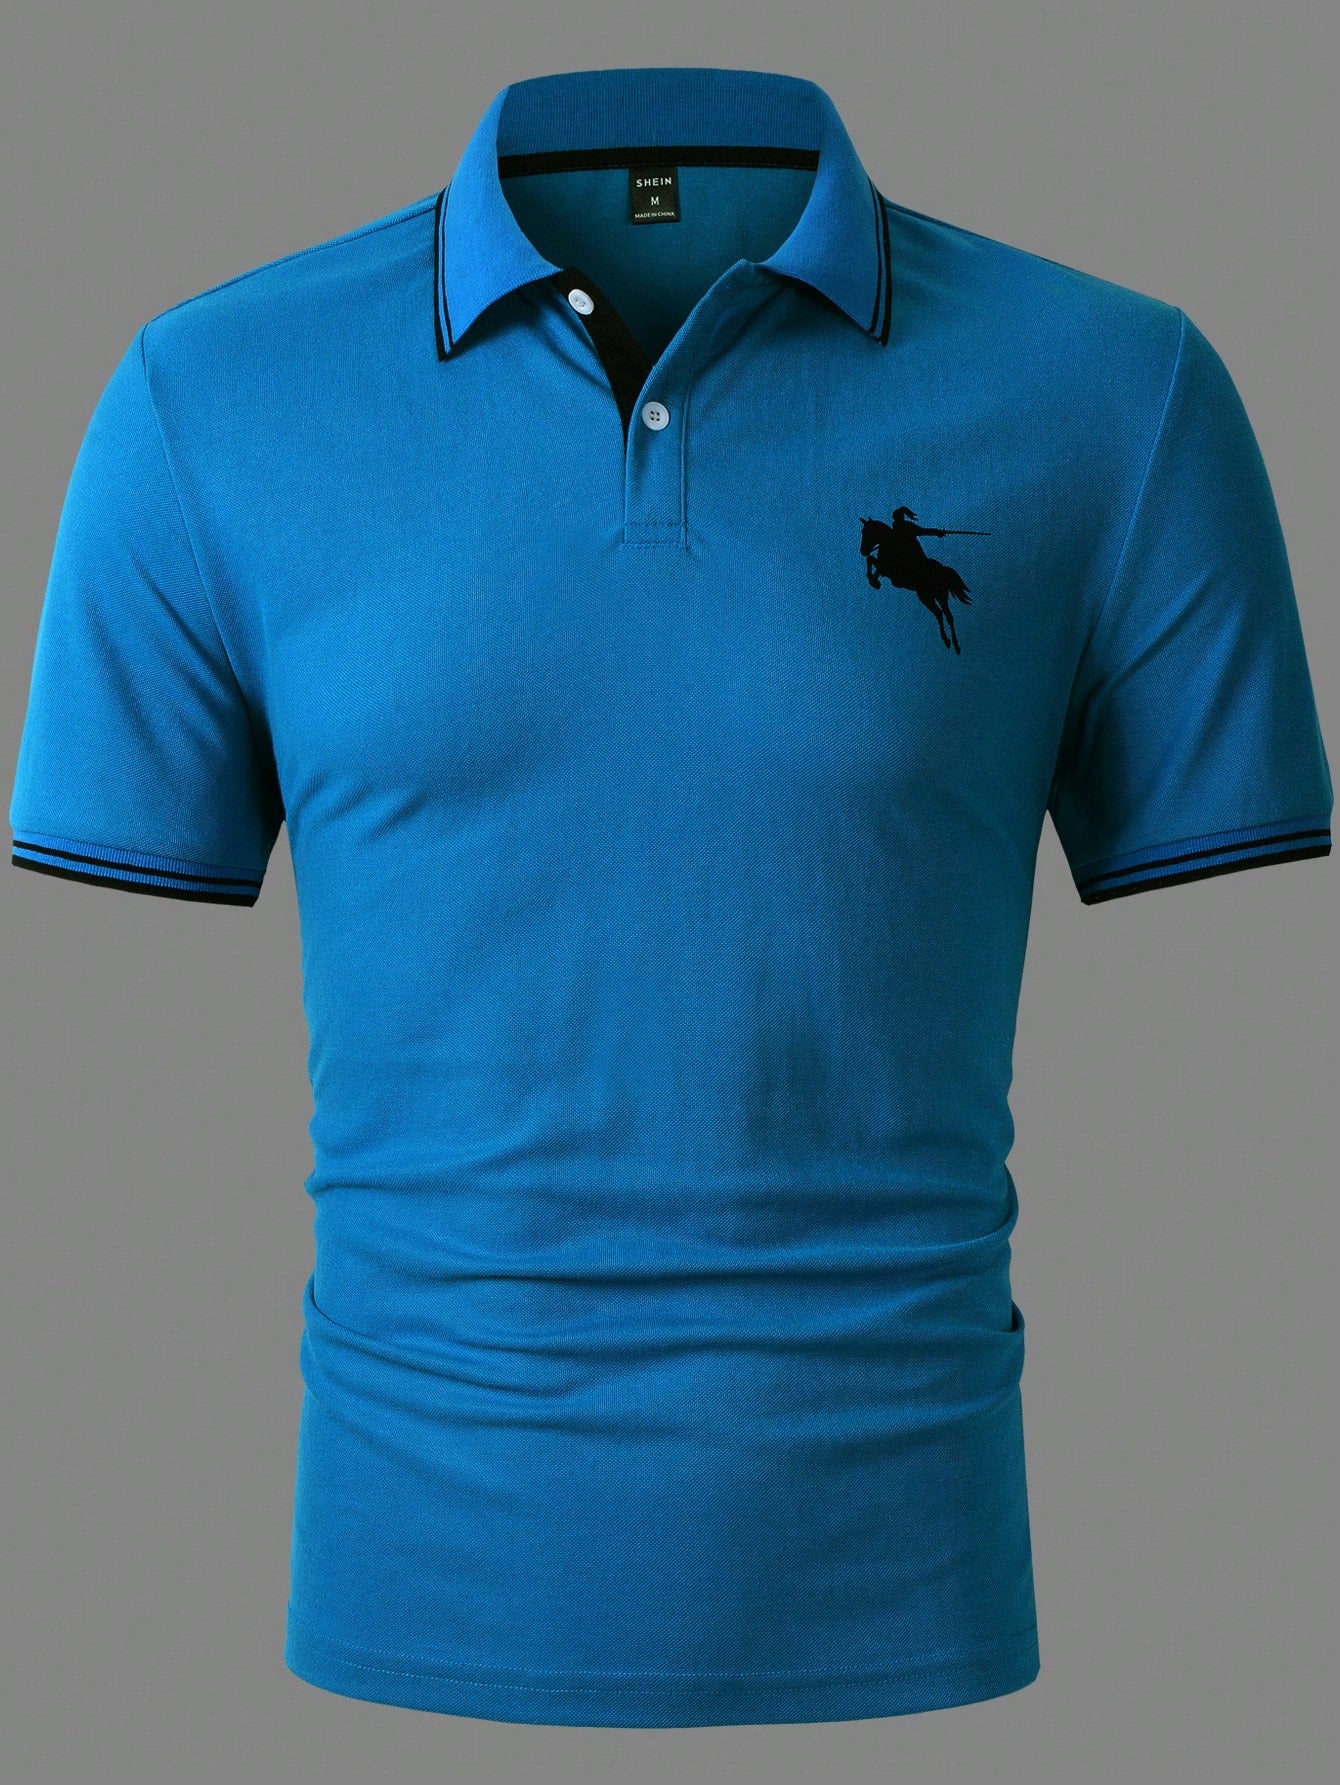 Horse Print Blue Polo Shirt for Men with Striped Trim